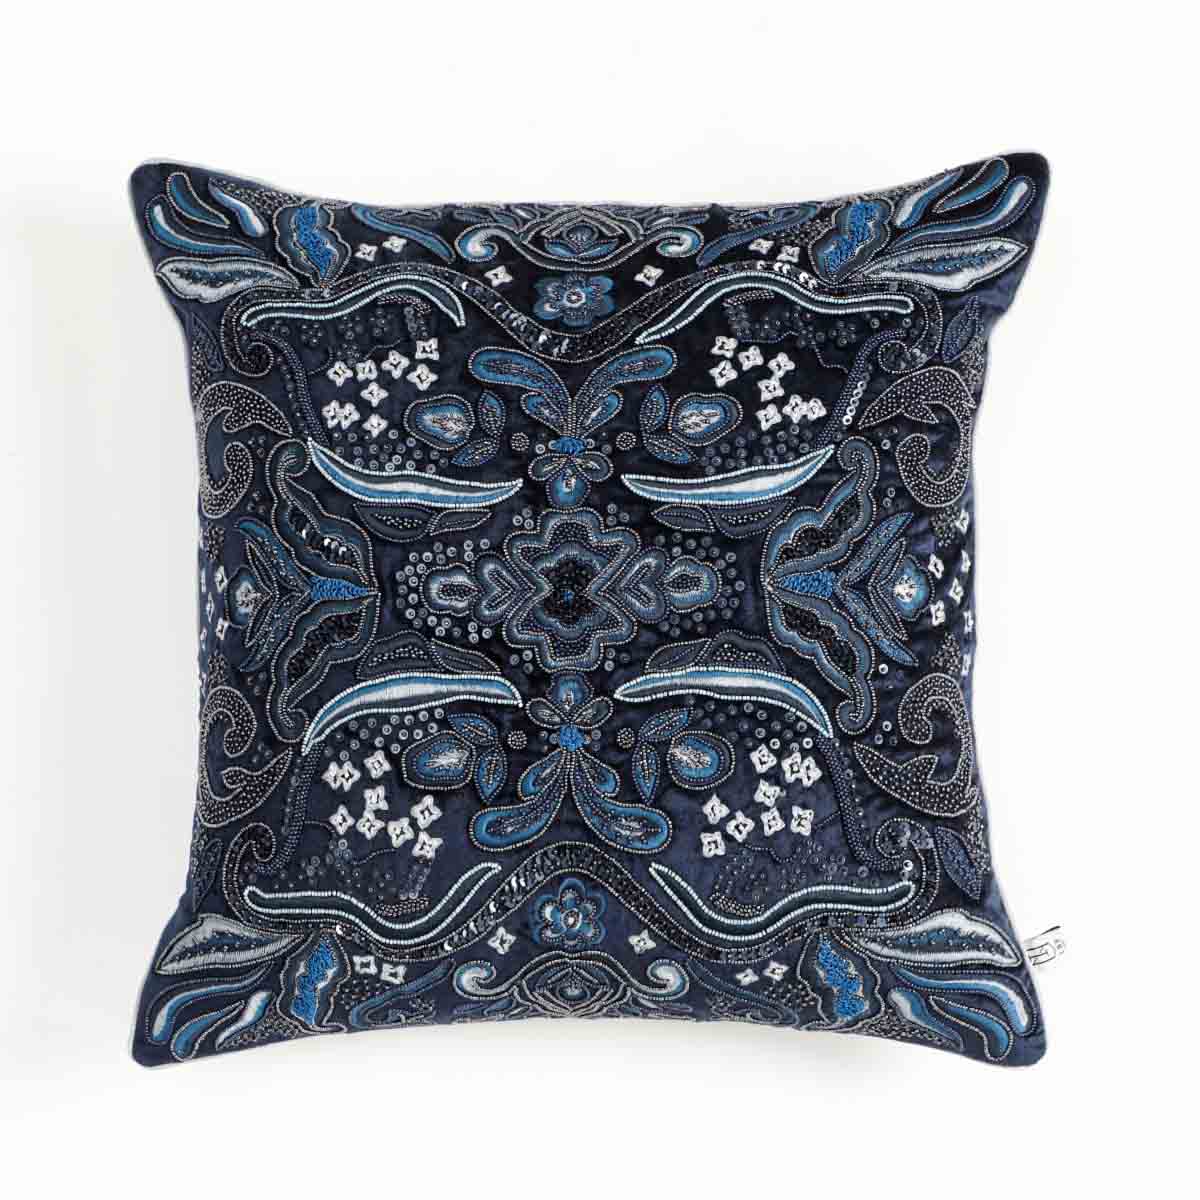 Benel Cushion Cover